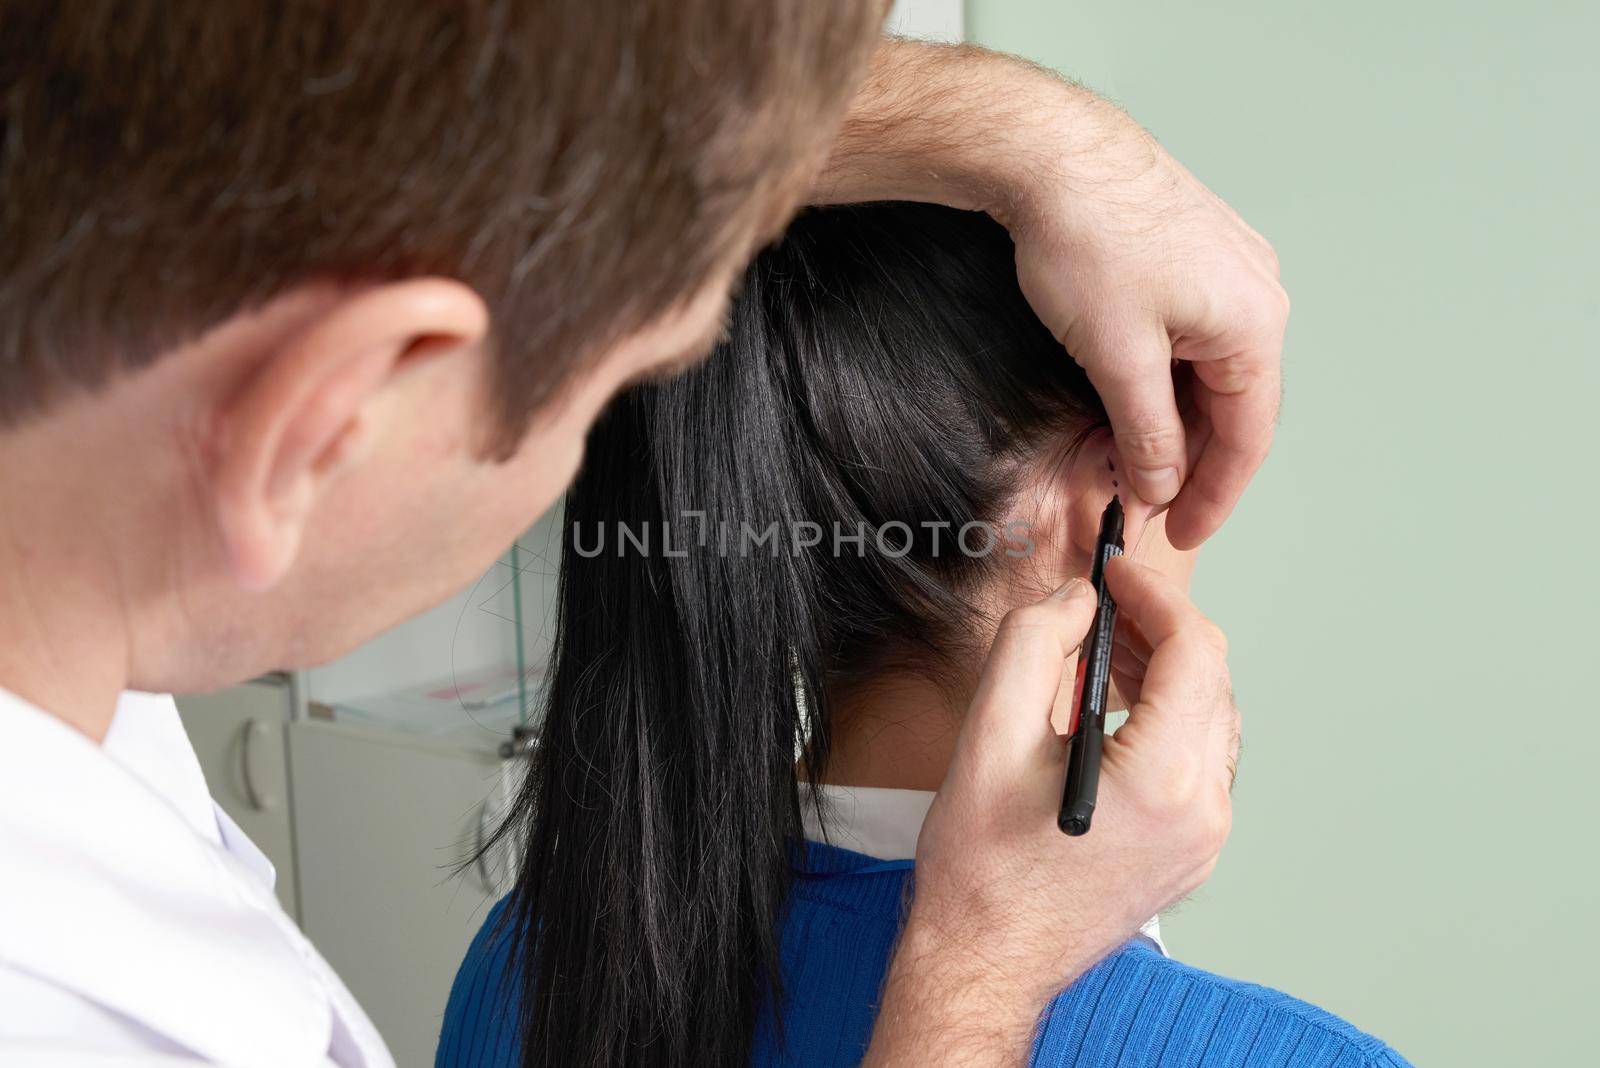 Plastic surgeon examines ear of patient before plastic surgery in hospital